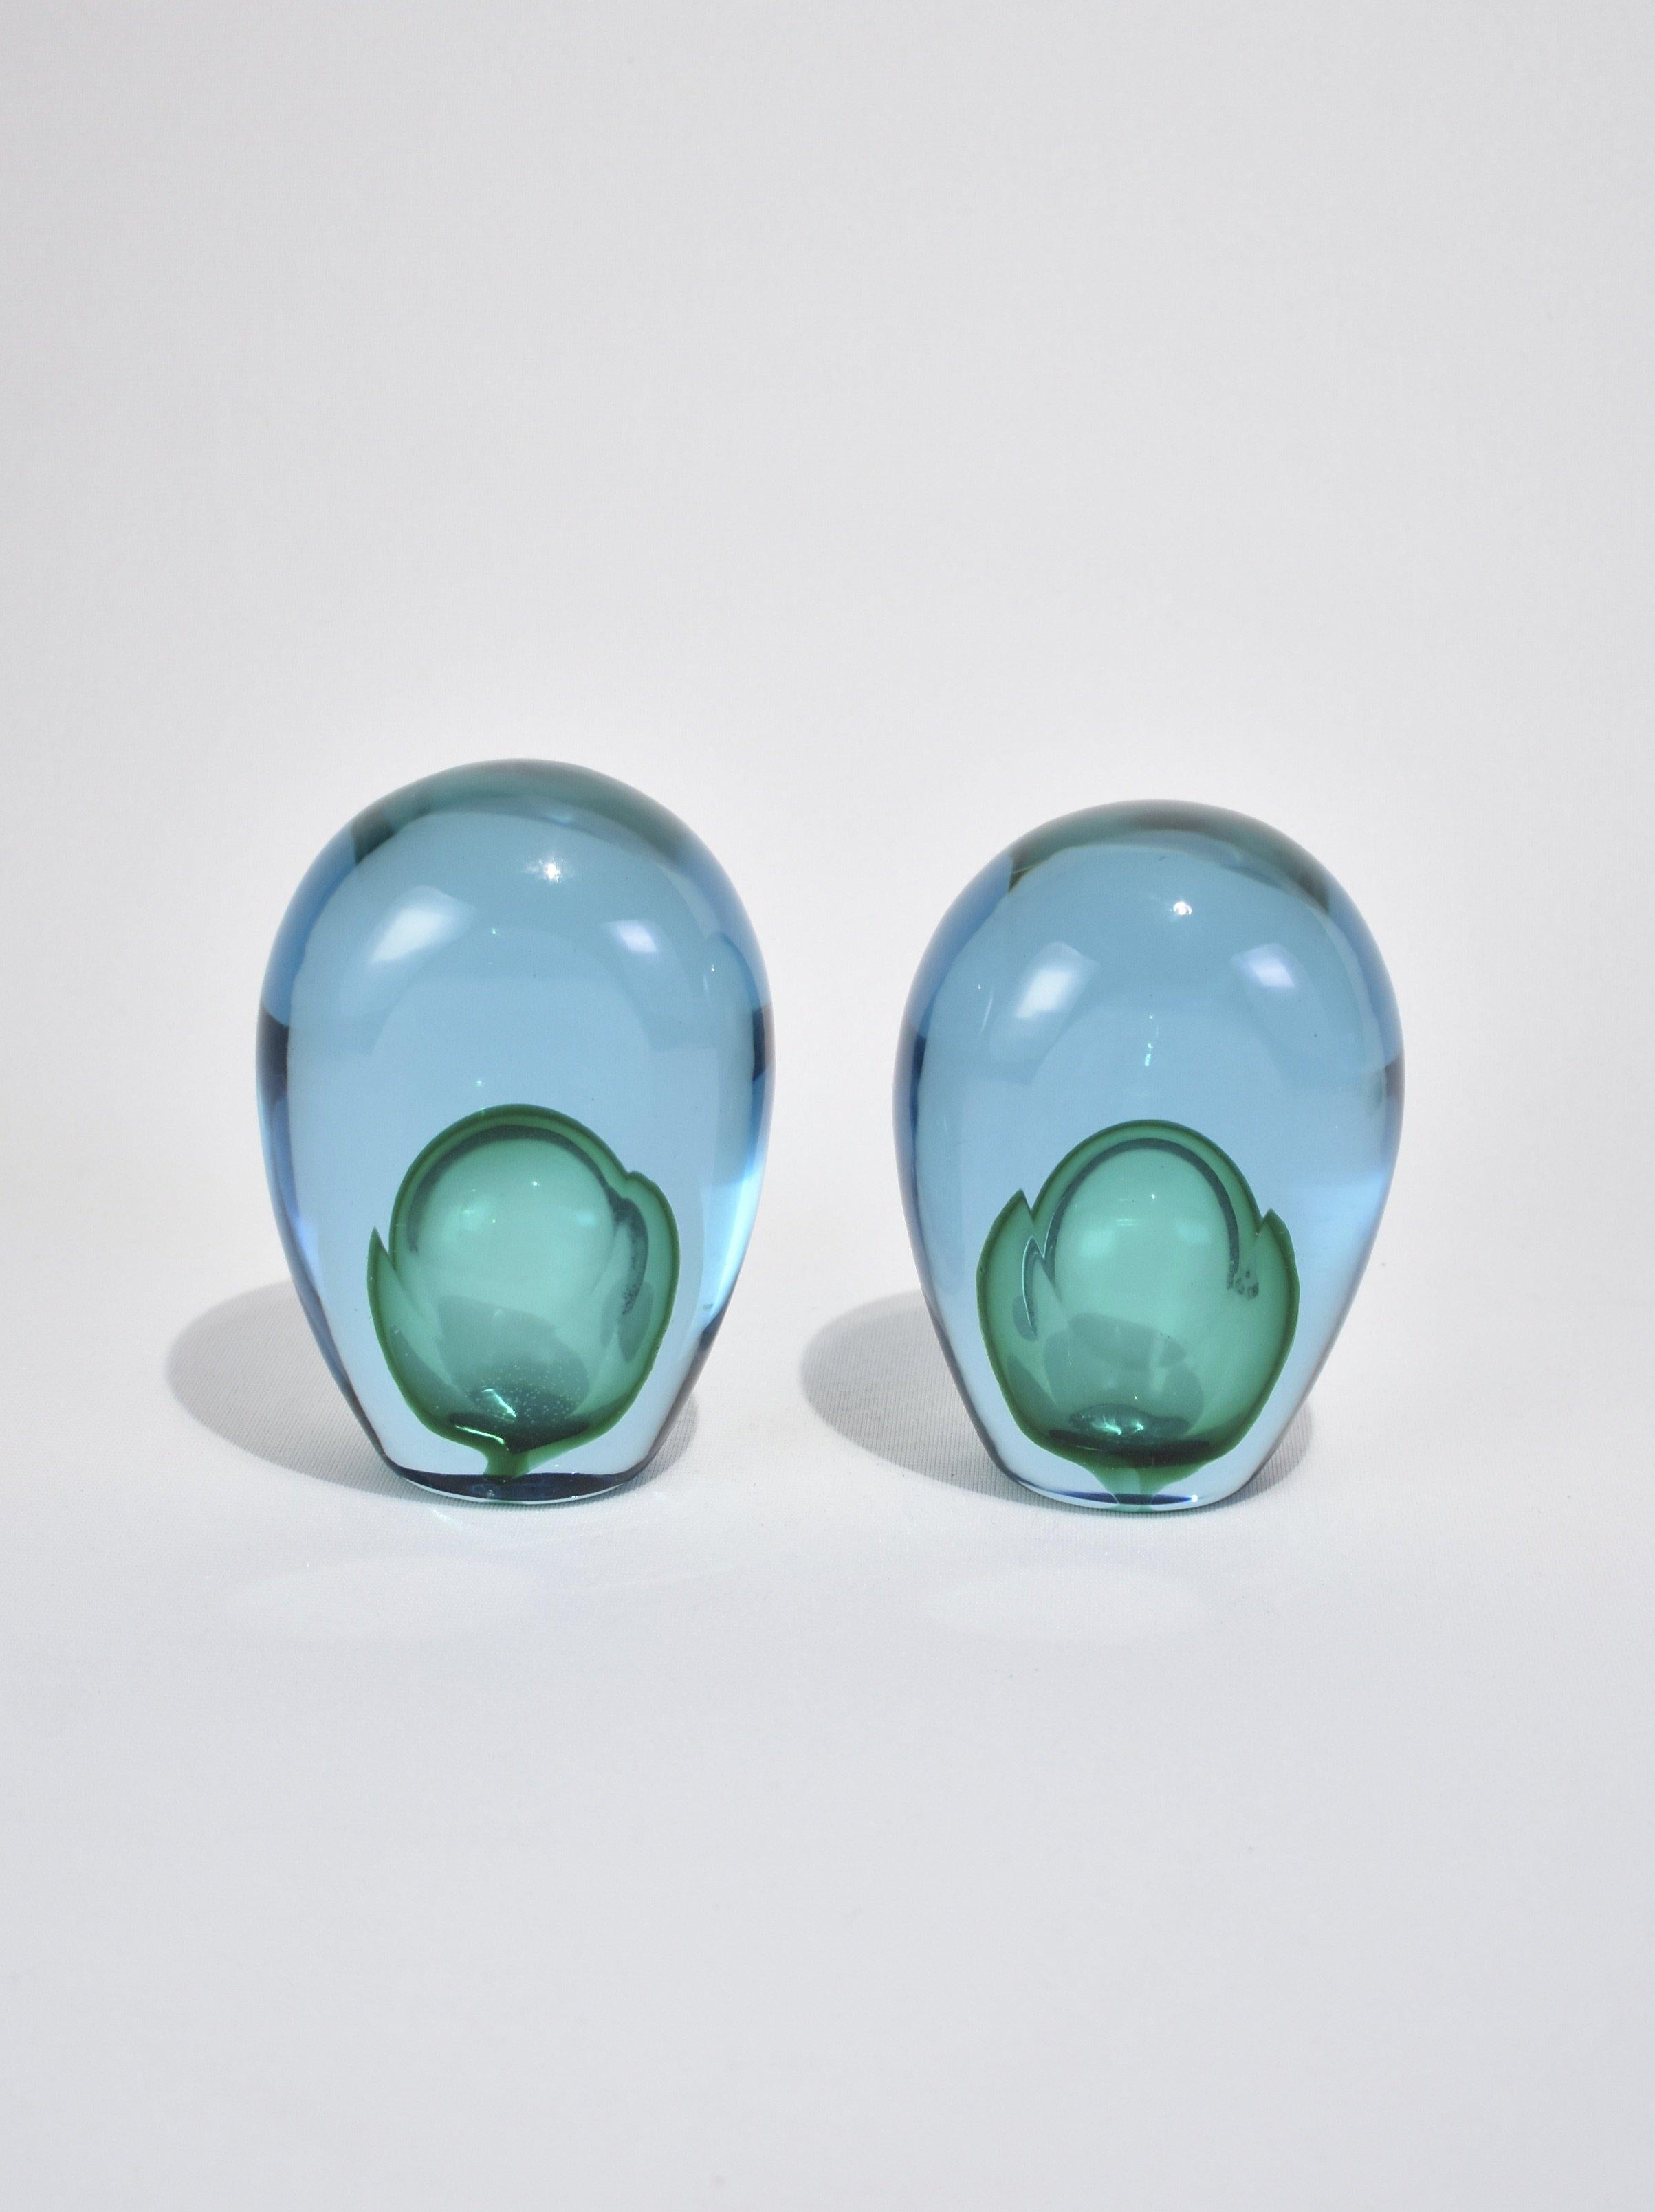 Beautiful hand blown sommerso blue glass bookends with teal interior. Attributed to Alfredo Barbini, made in Italy. Ca. 1960s.